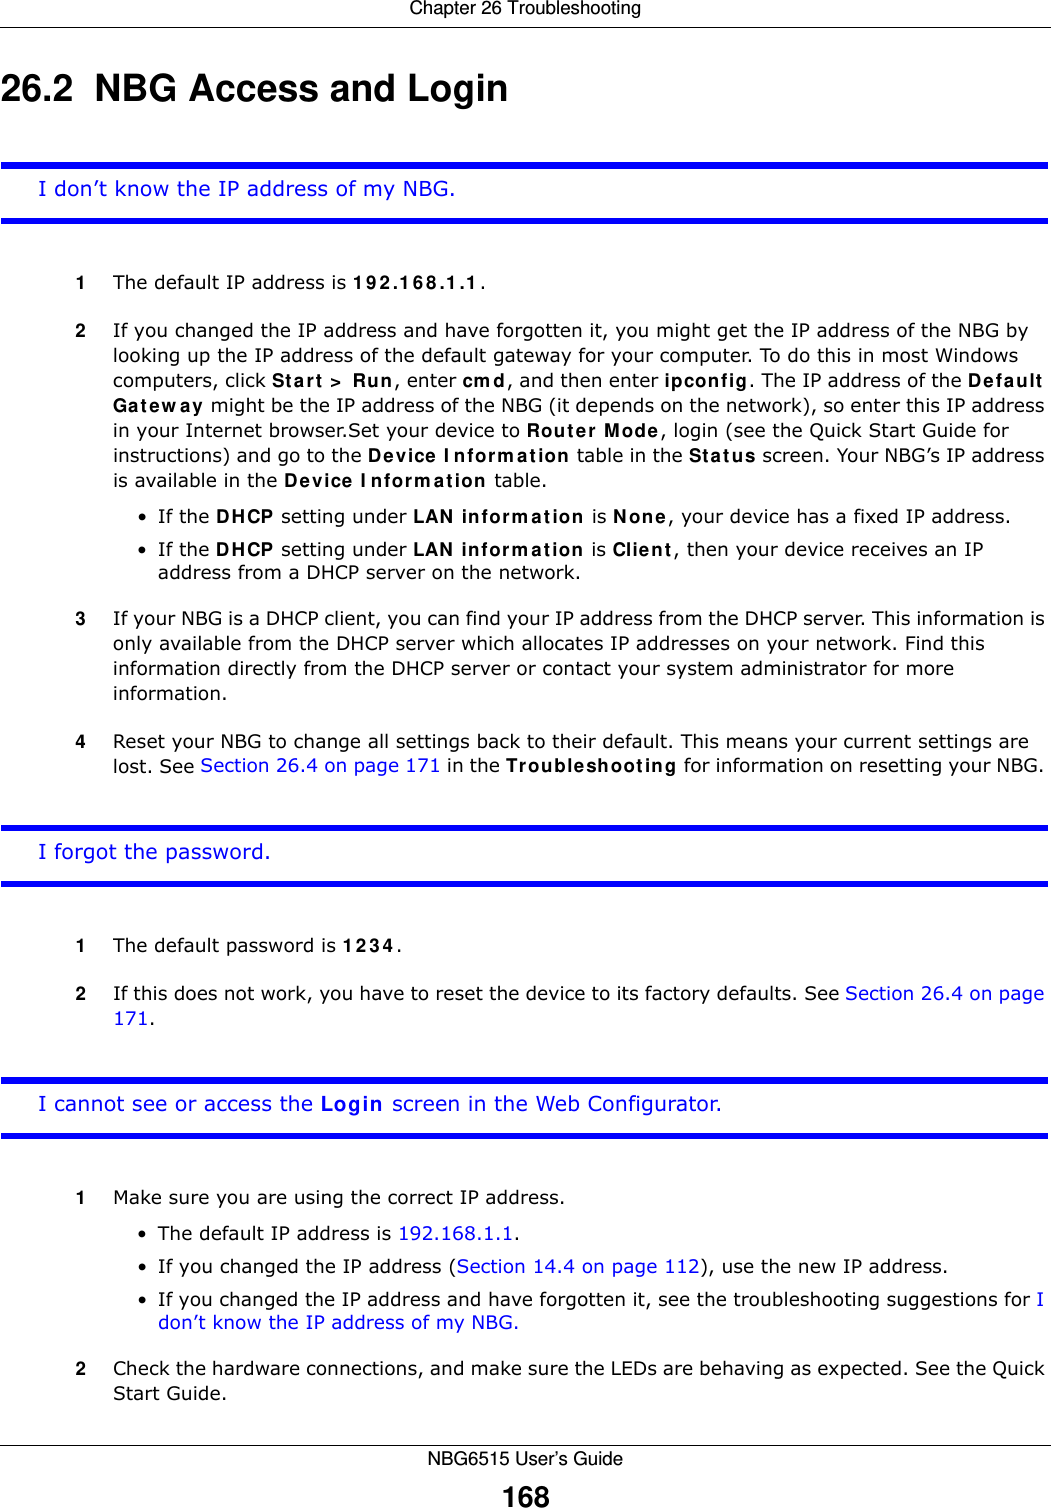 Chapter 26 TroubleshootingNBG6515 User’s Guide16826.2  NBG Access and LoginI don’t know the IP address of my NBG.1The default IP address is 192.168.1.1.2If you changed the IP address and have forgotten it, you might get the IP address of the NBG by looking up the IP address of the default gateway for your computer. To do this in most Windows computers, click Start &gt; Run, enter cmd, and then enter ipconfig. The IP address of the Default Gateway might be the IP address of the NBG (it depends on the network), so enter this IP address in your Internet browser.Set your device to Router Mode, login (see the Quick Start Guide for instructions) and go to the Device Information table in the Status screen. Your NBG’s IP address is available in the Device Information table. •If the DHCP setting under LAN information is None, your device has a fixed IP address. •If the DHCP setting under LAN information is Client, then your device receives an IP address from a DHCP server on the network. 3If your NBG is a DHCP client, you can find your IP address from the DHCP server. This information is only available from the DHCP server which allocates IP addresses on your network. Find this information directly from the DHCP server or contact your system administrator for more information.4Reset your NBG to change all settings back to their default. This means your current settings are lost. See Section 26.4 on page 171 in the Troubleshooting for information on resetting your NBG. I forgot the password.1The default password is 1234.2If this does not work, you have to reset the device to its factory defaults. See Section 26.4 on page 171.I cannot see or access the Login screen in the Web Configurator.1Make sure you are using the correct IP address.• The default IP address is 192.168.1.1.• If you changed the IP address (Section 14.4 on page 112), use the new IP address.• If you changed the IP address and have forgotten it, see the troubleshooting suggestions for I don’t know the IP address of my NBG.2Check the hardware connections, and make sure the LEDs are behaving as expected. See the Quick Start Guide. 